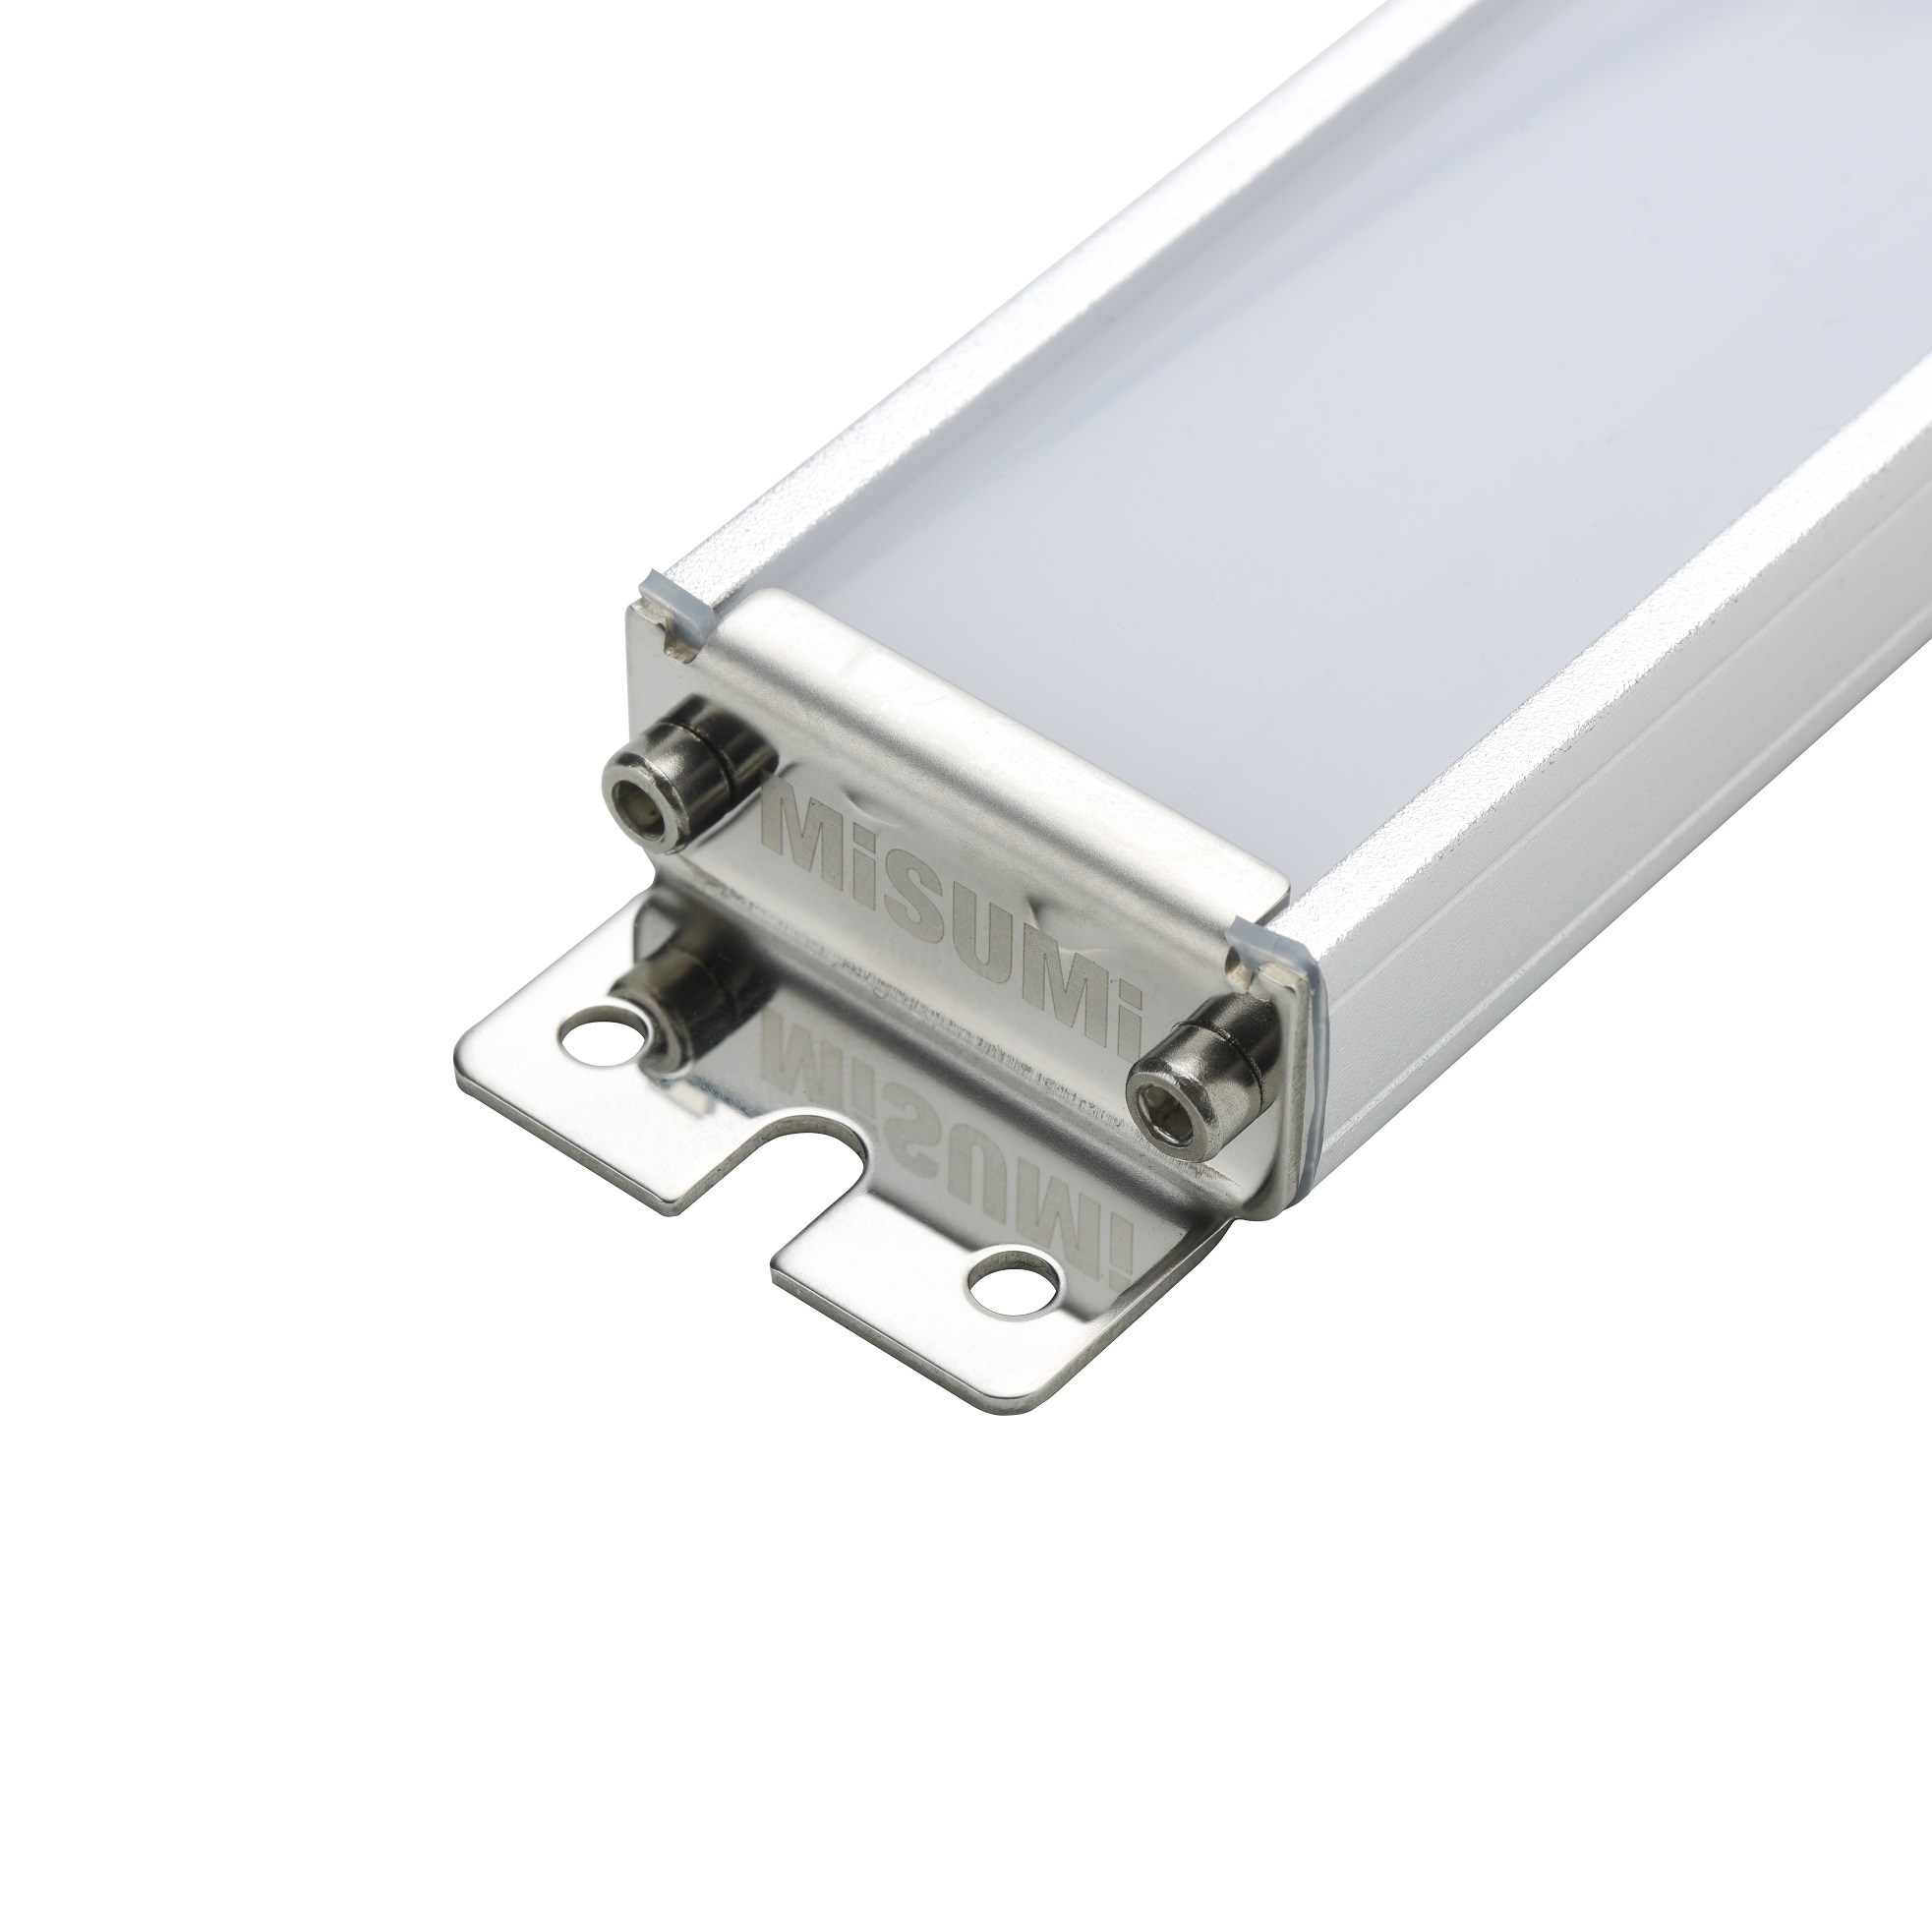 Economy Series LED Lighting, IP20 Standard Product Drawing